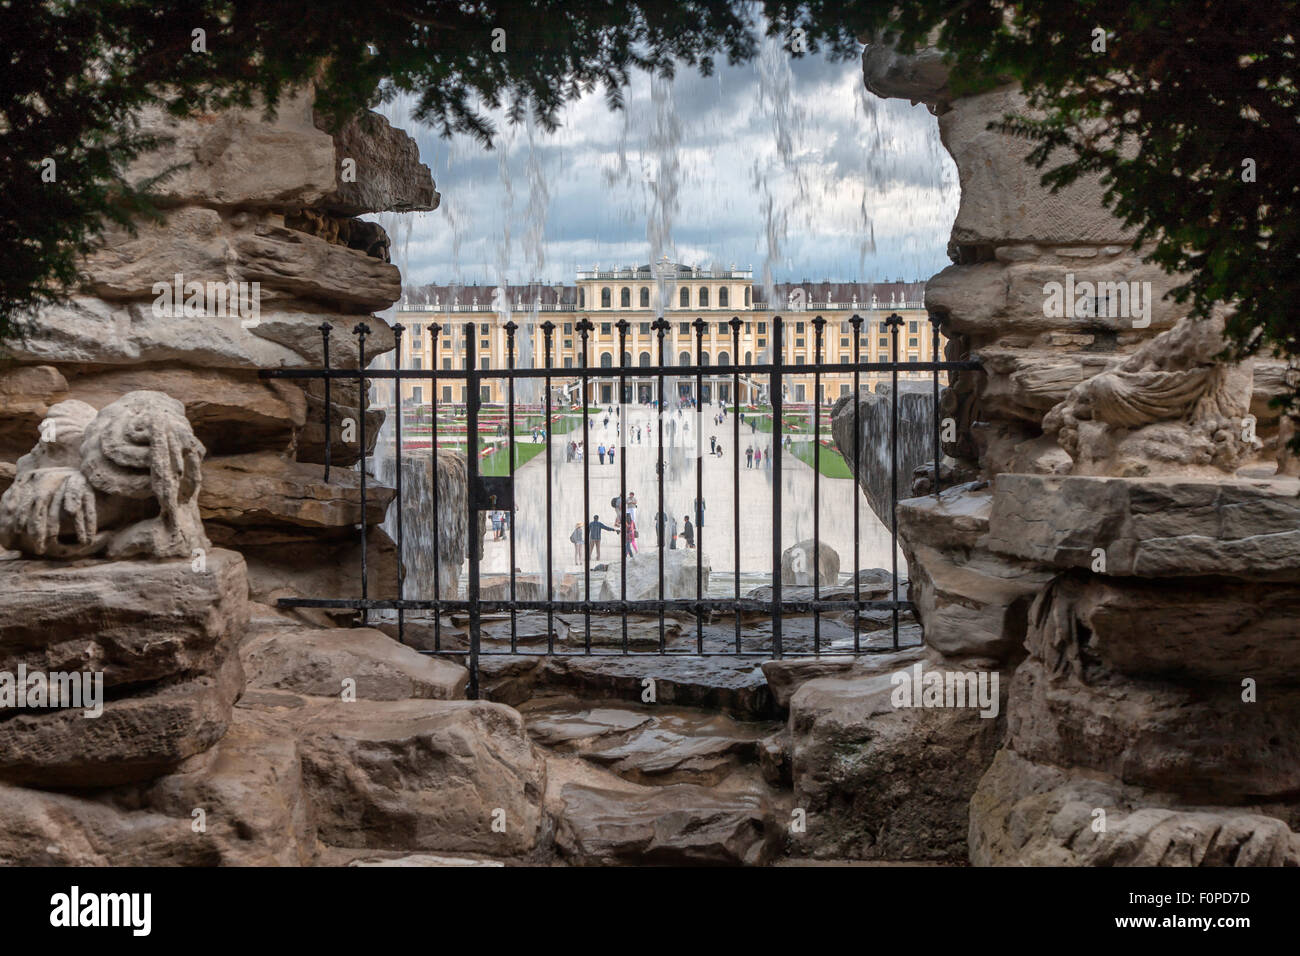 Schoenbrunn Palace and Gardens with Neptun Fountain in foreground, Vienna, Austria Stock Photo